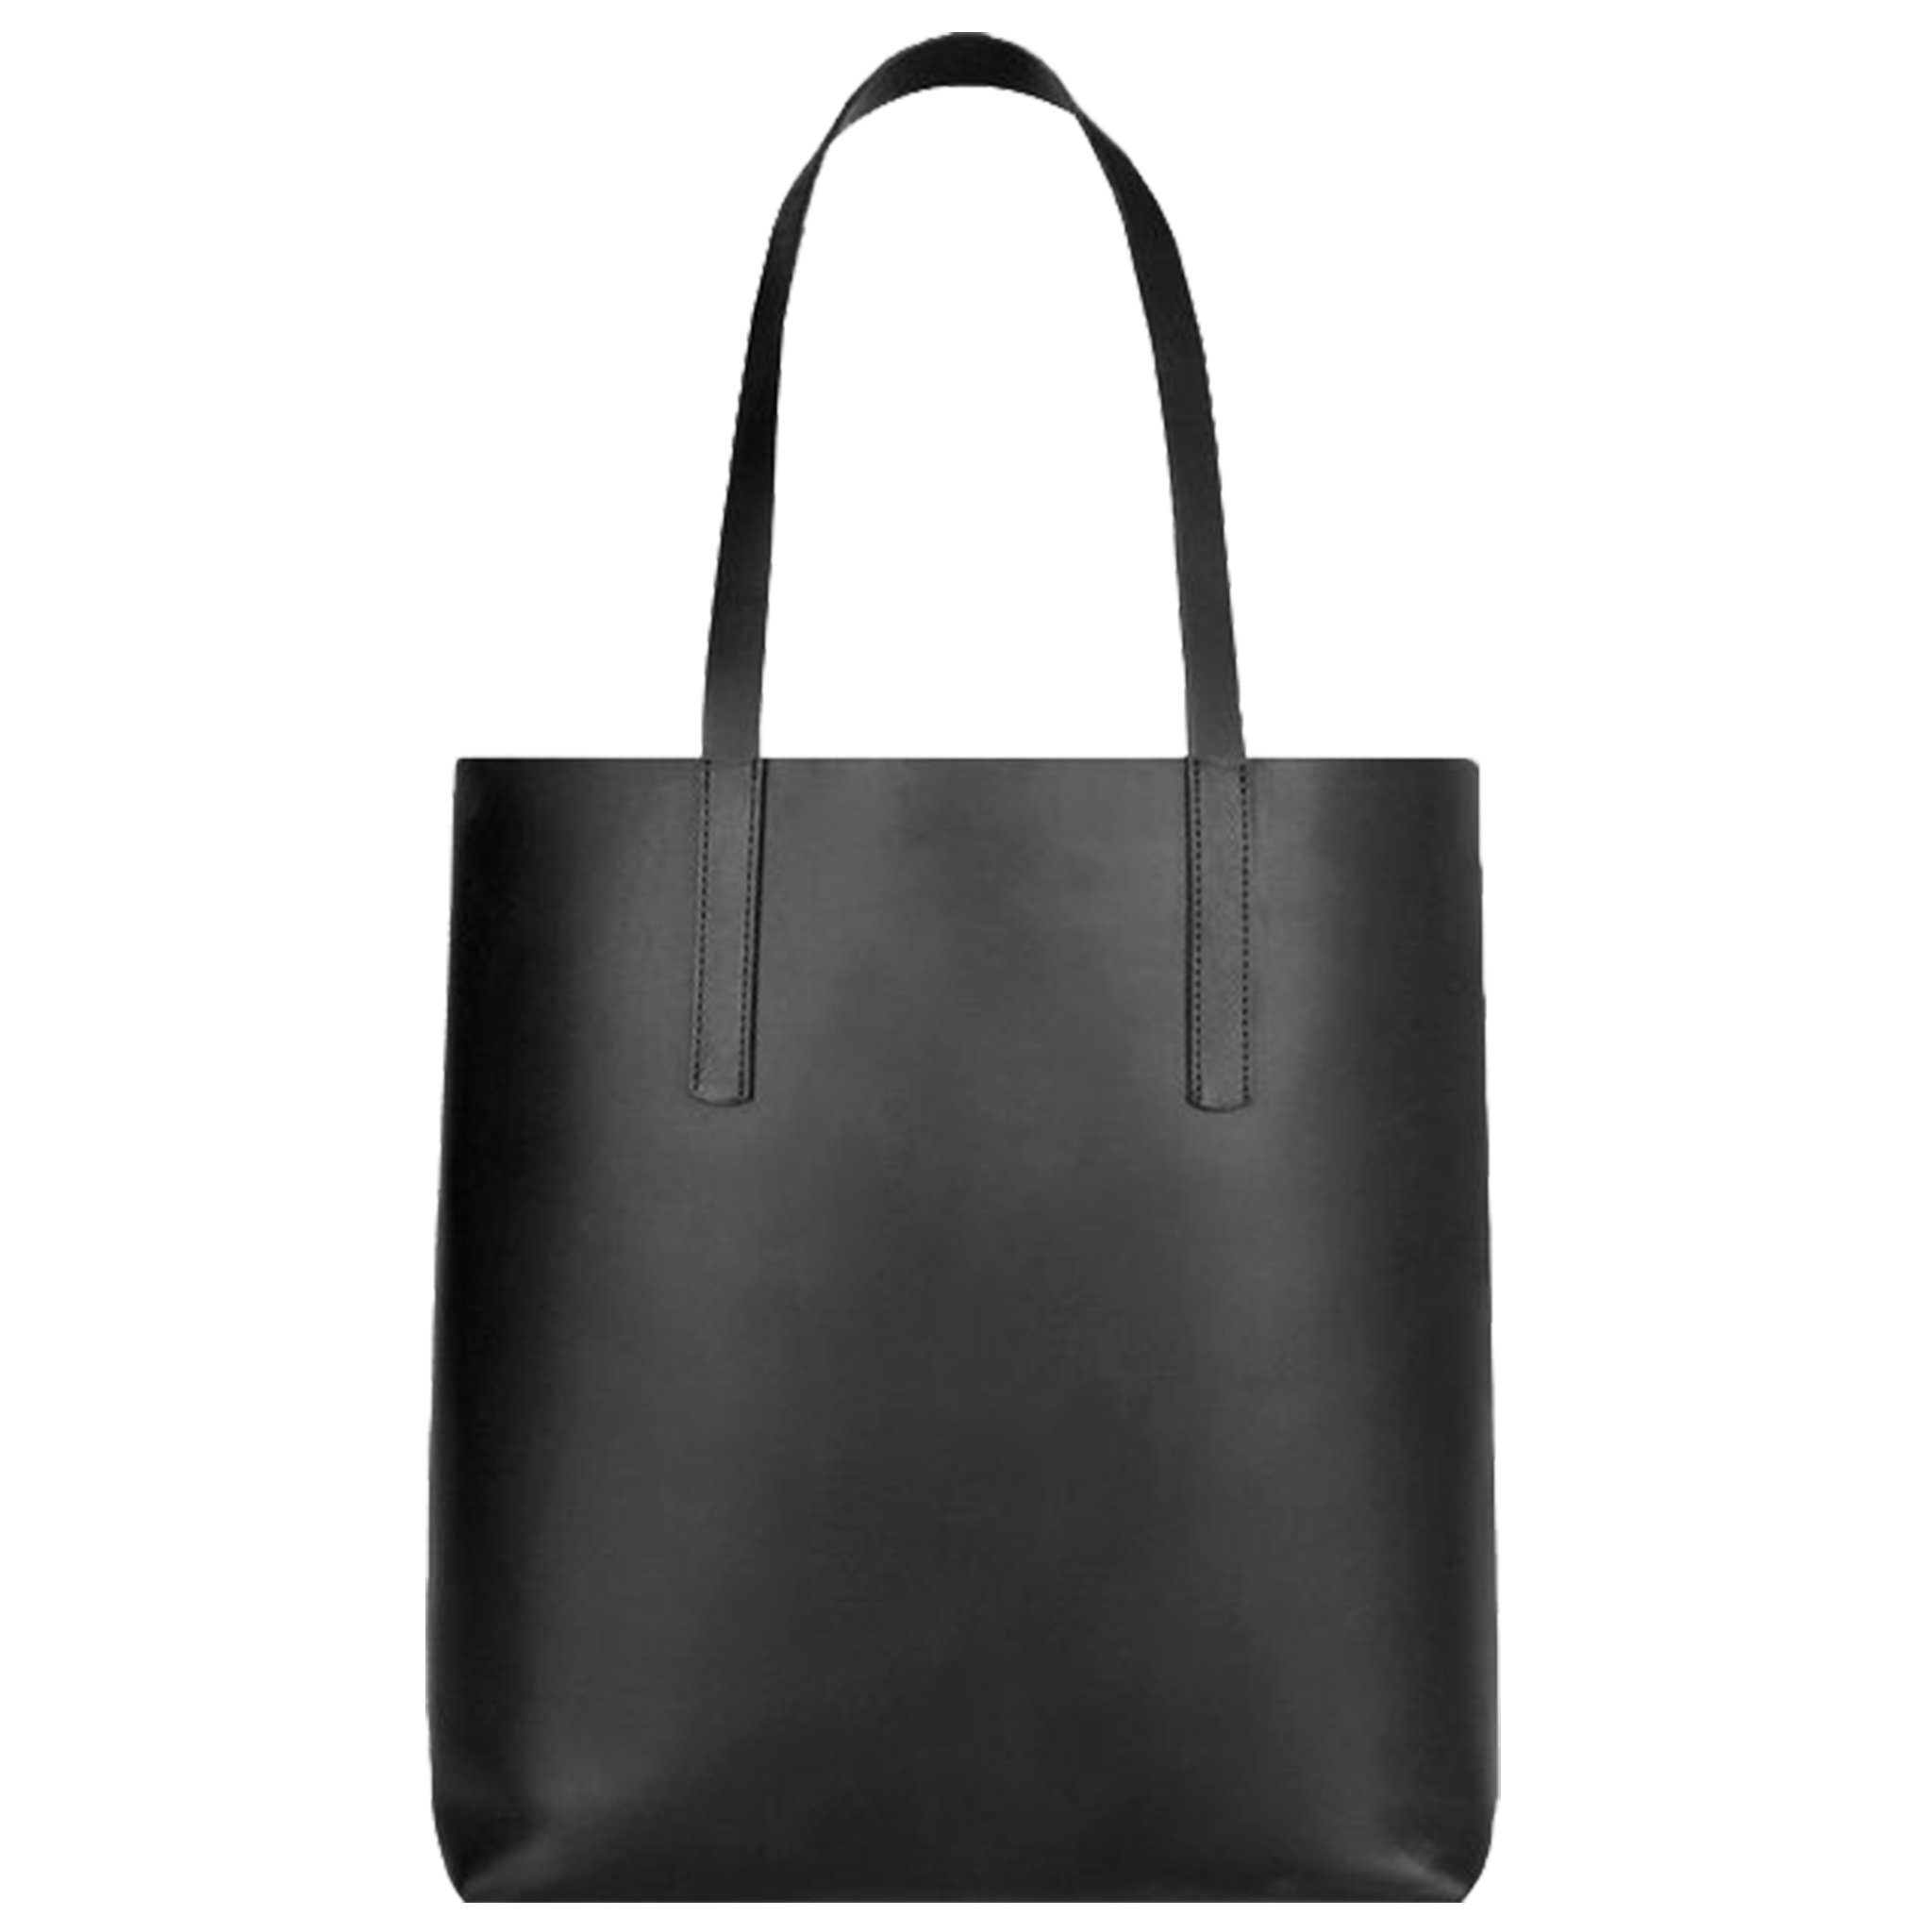 Leatherette Tote with Pouch (TB09)